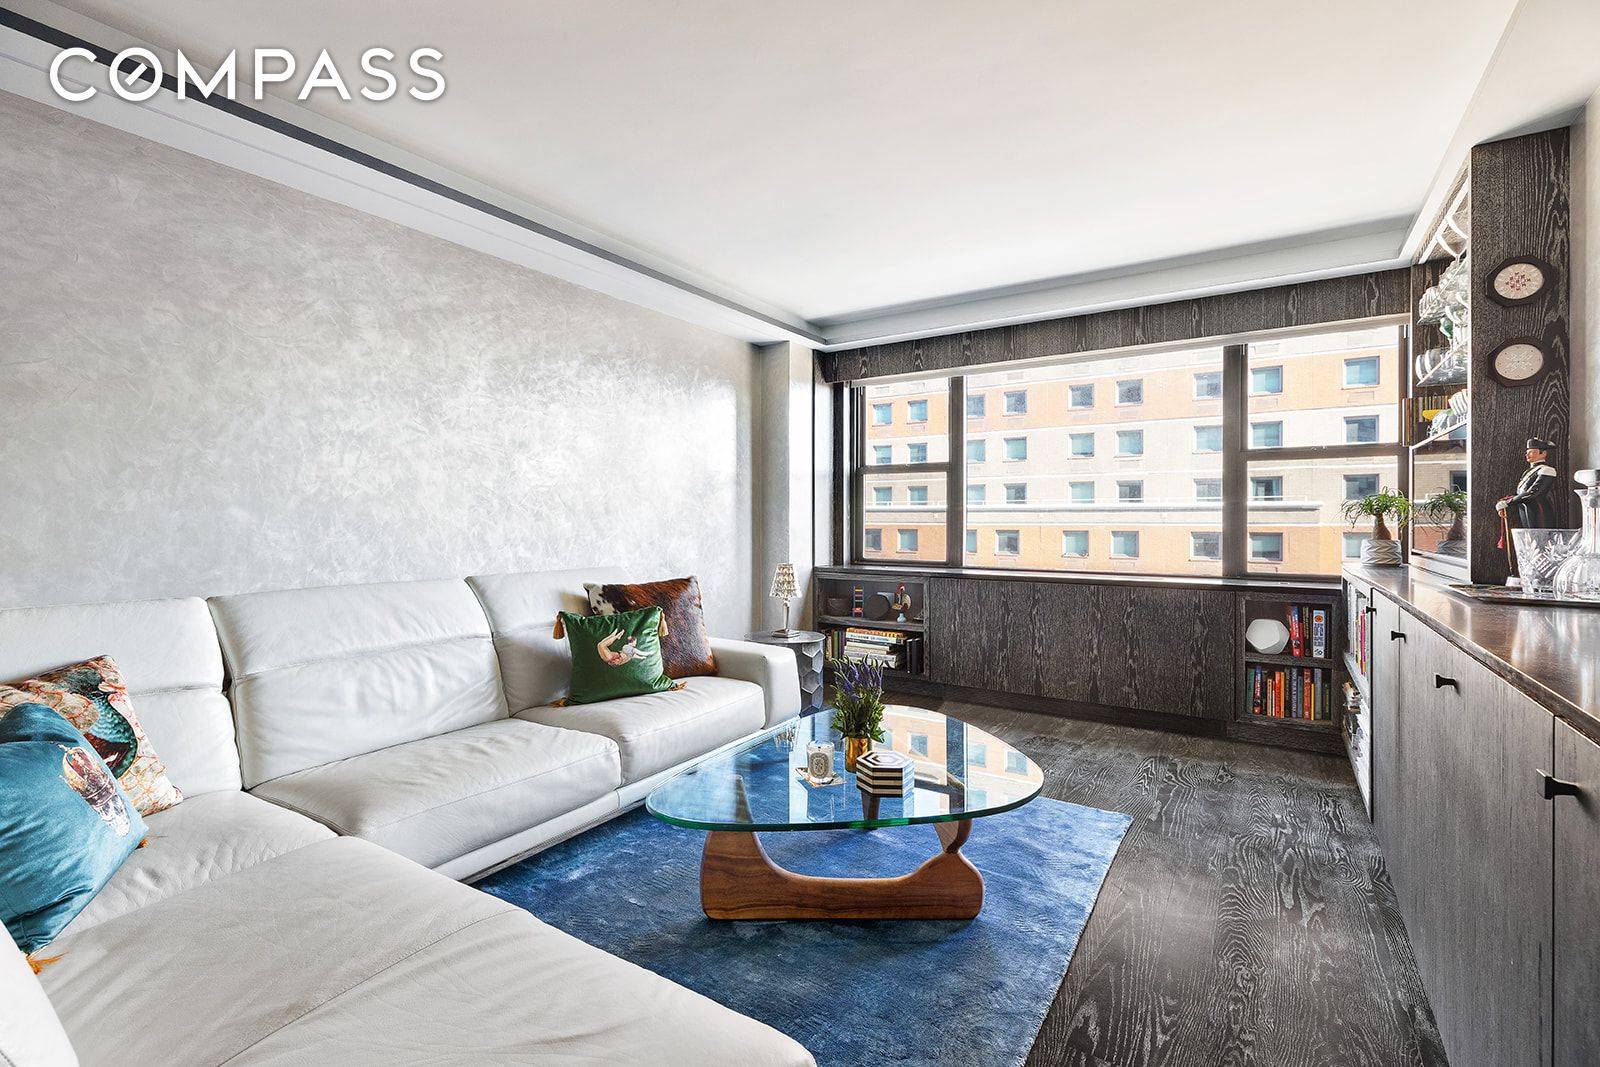 Introducing 7D, an exquisitely renovated 1 bedroom with open views of Astor Place at the fabulous, full service, mid century modern St.